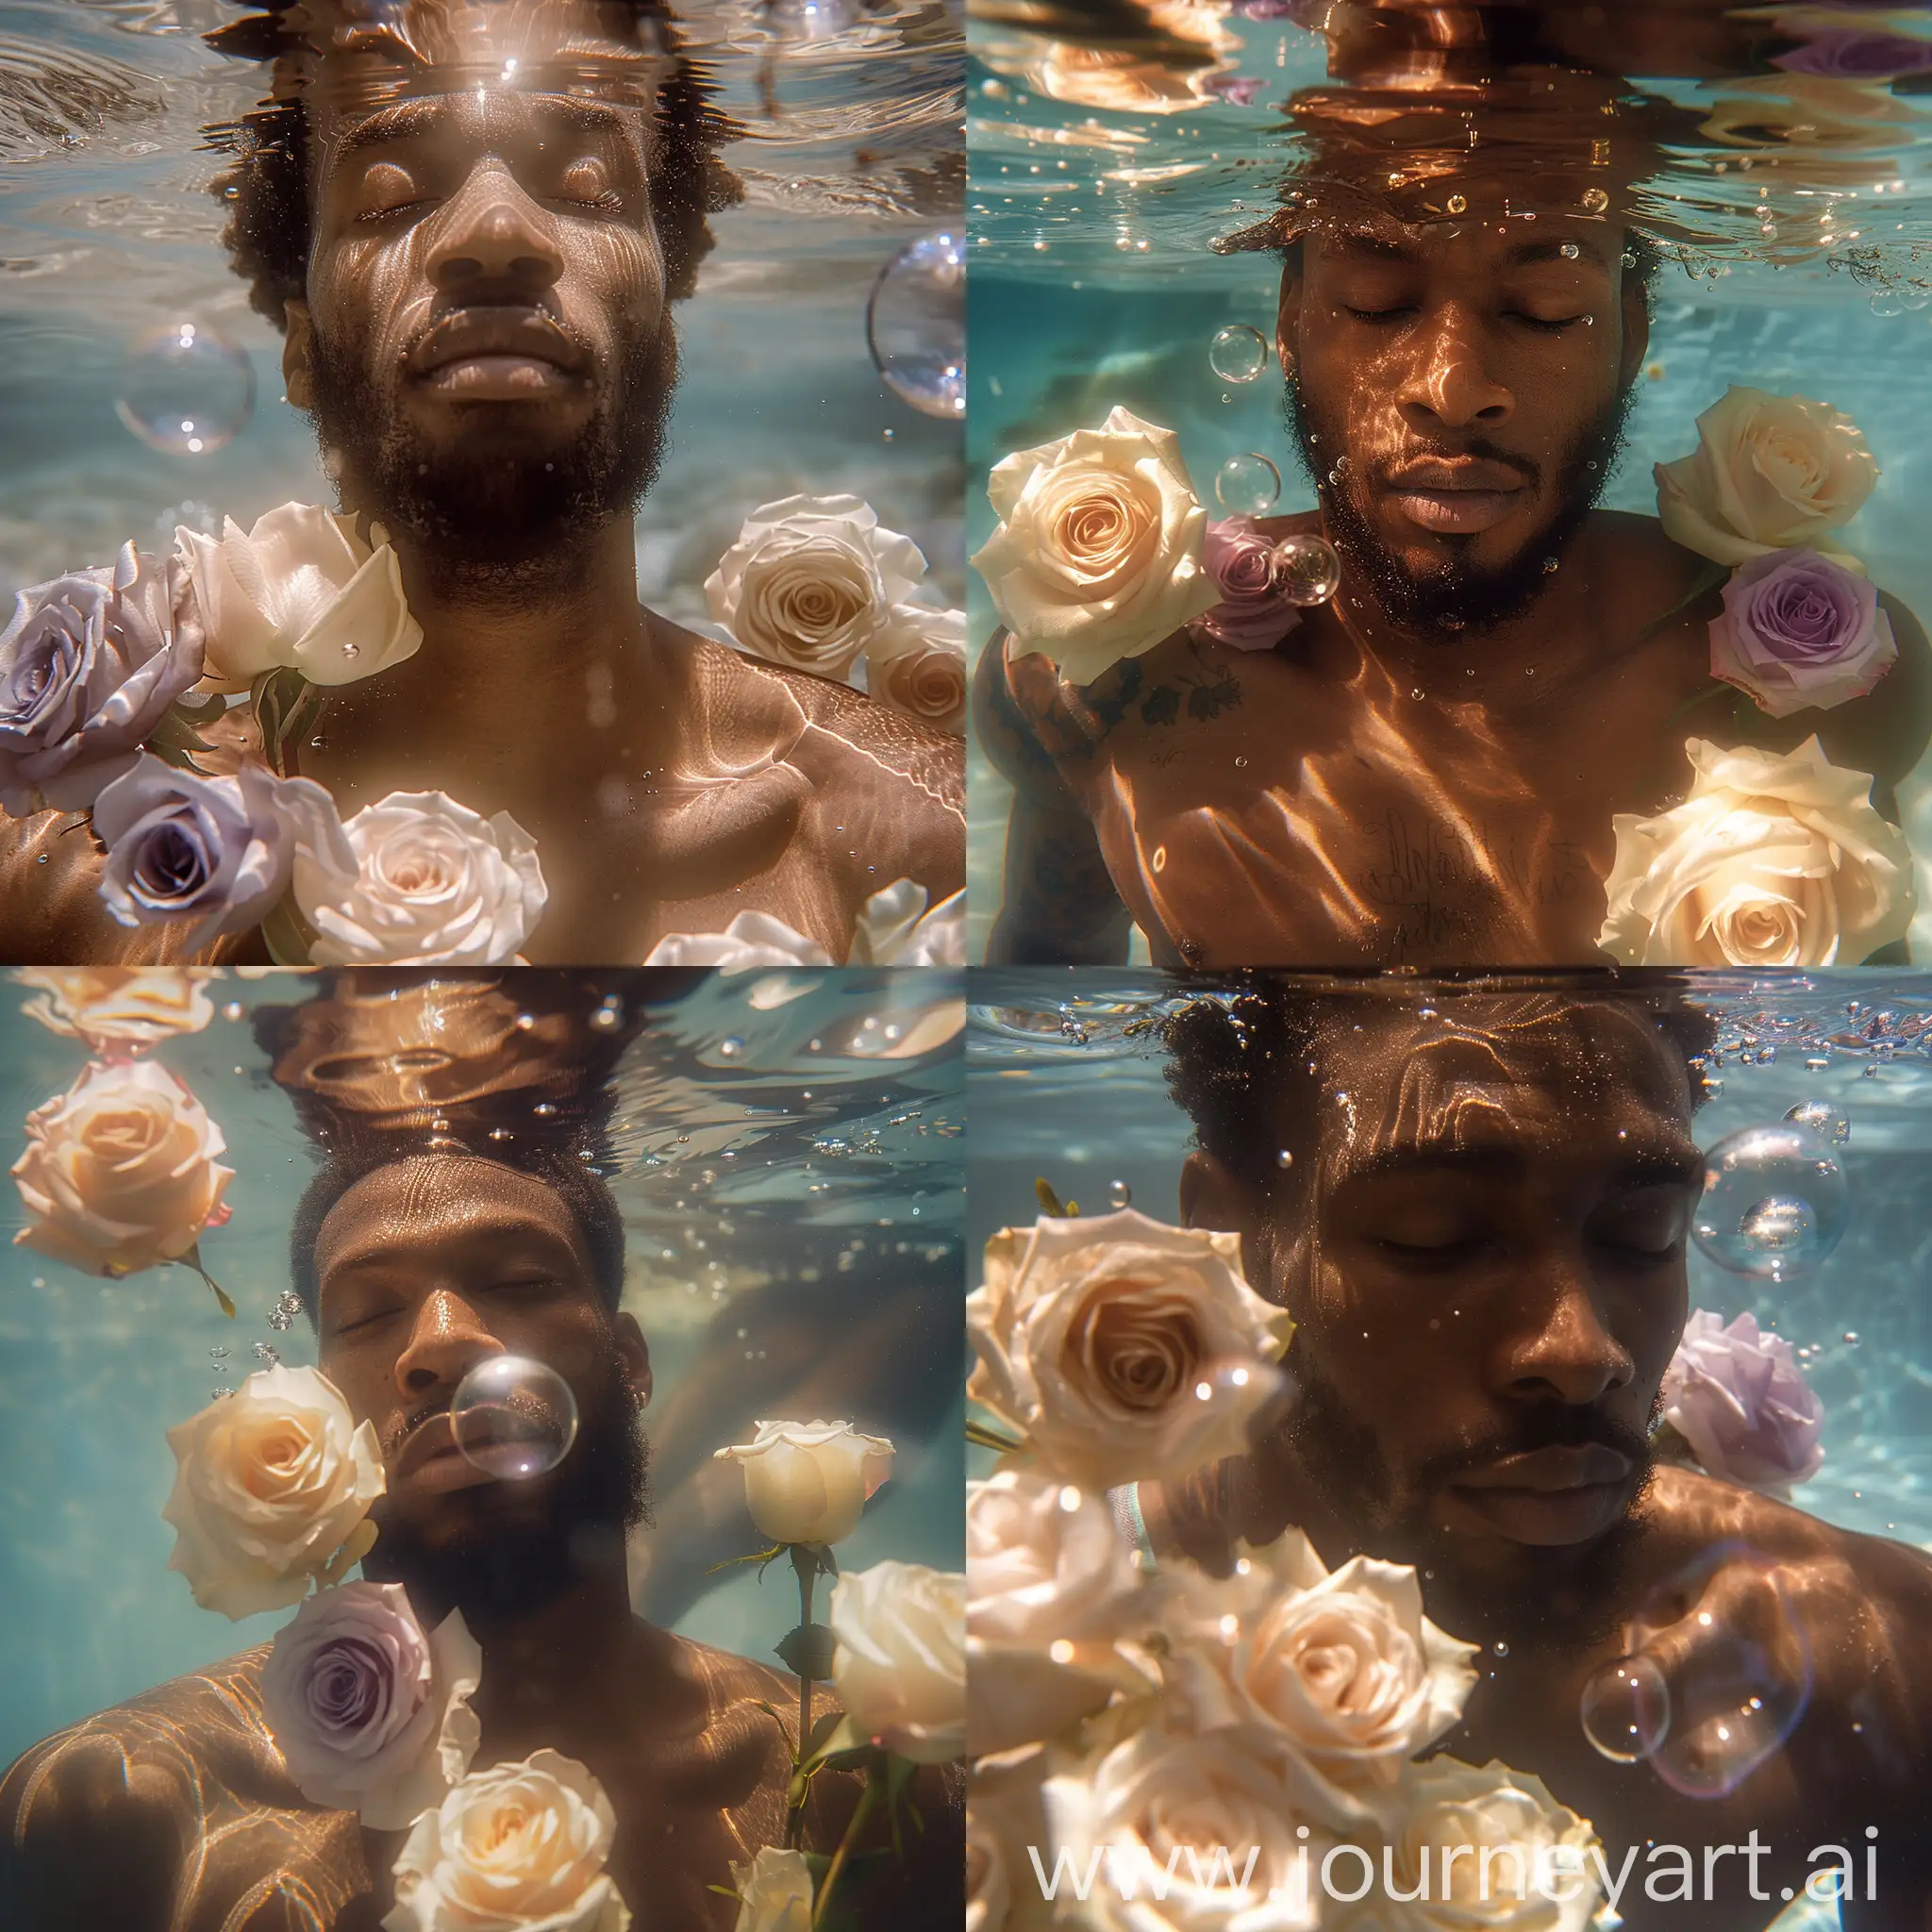 Serene-Underwater-Portrait-of-a-Handsome-Shirtless-Black-Man-Surrounded-by-Roses-and-Bubbles